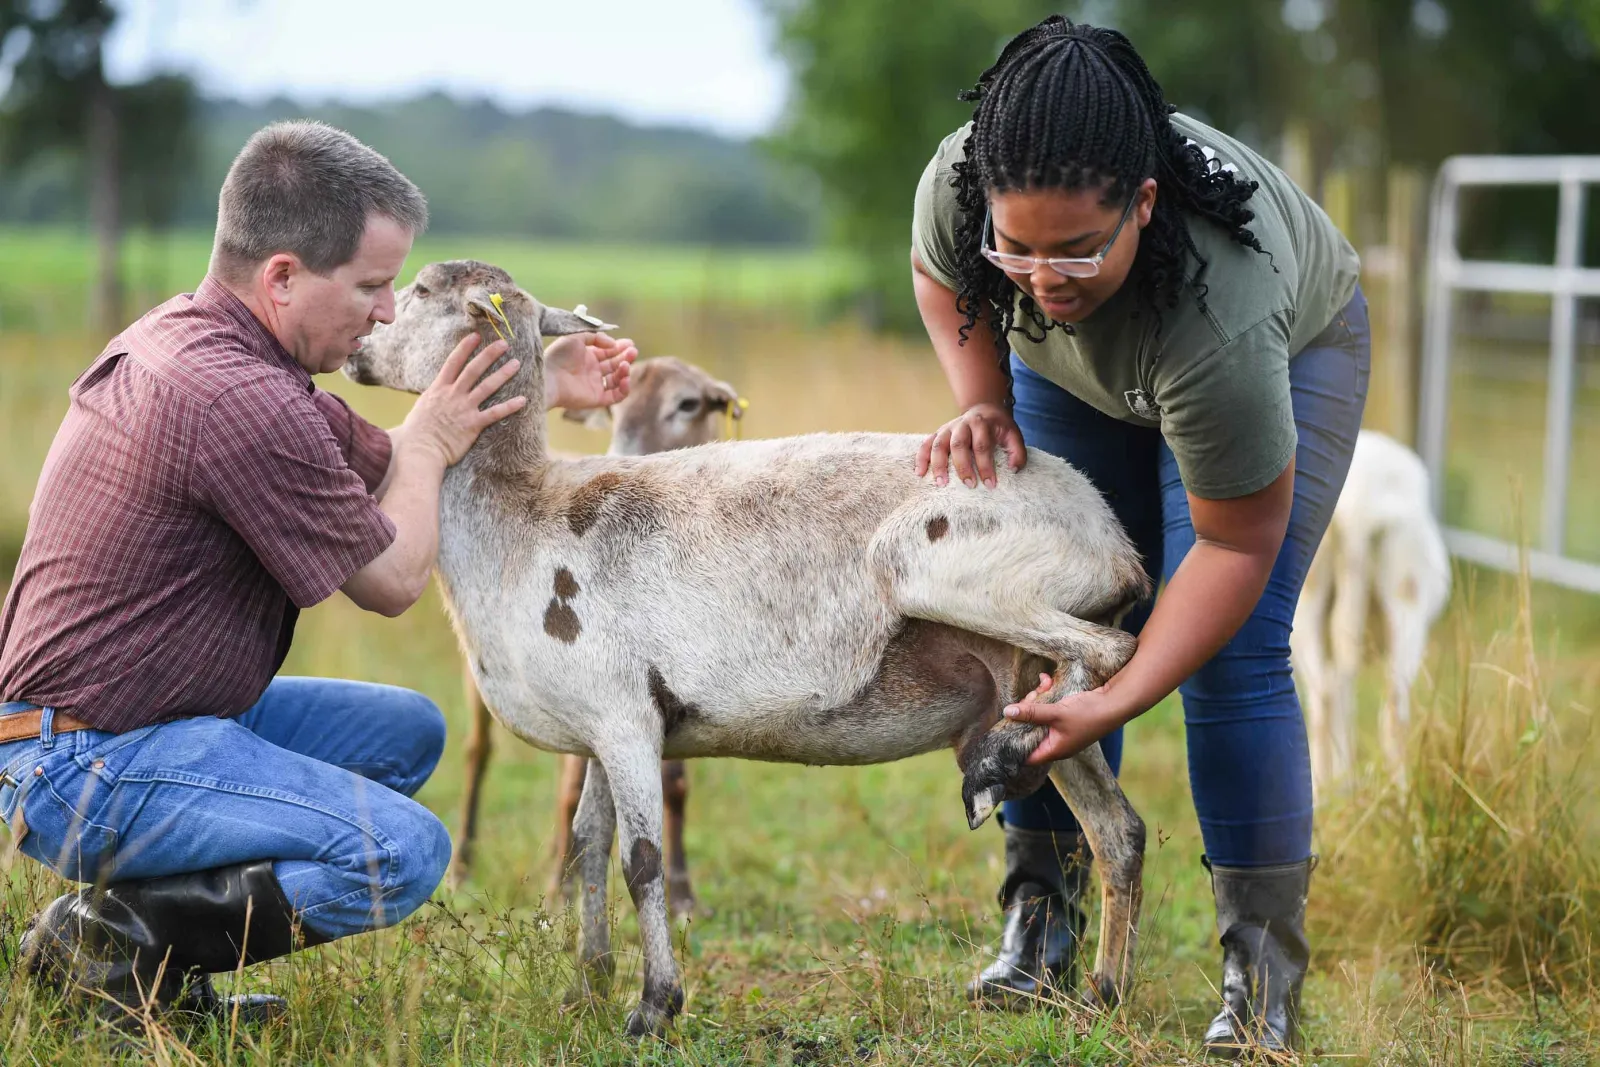 Student and professor examine a goat